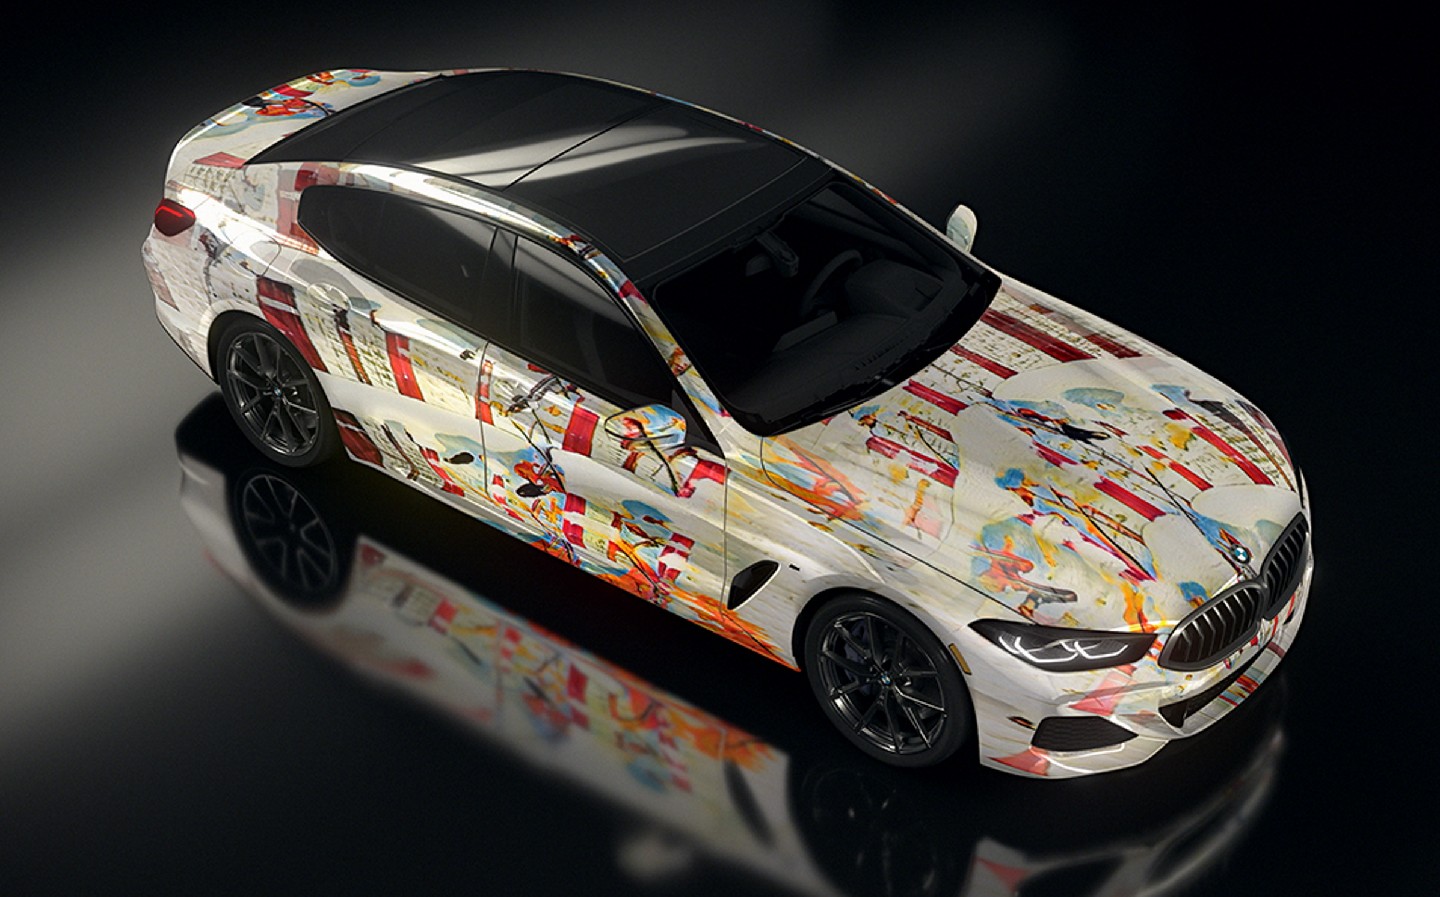 BMW projects AI-generated art onto car for advertising campaign